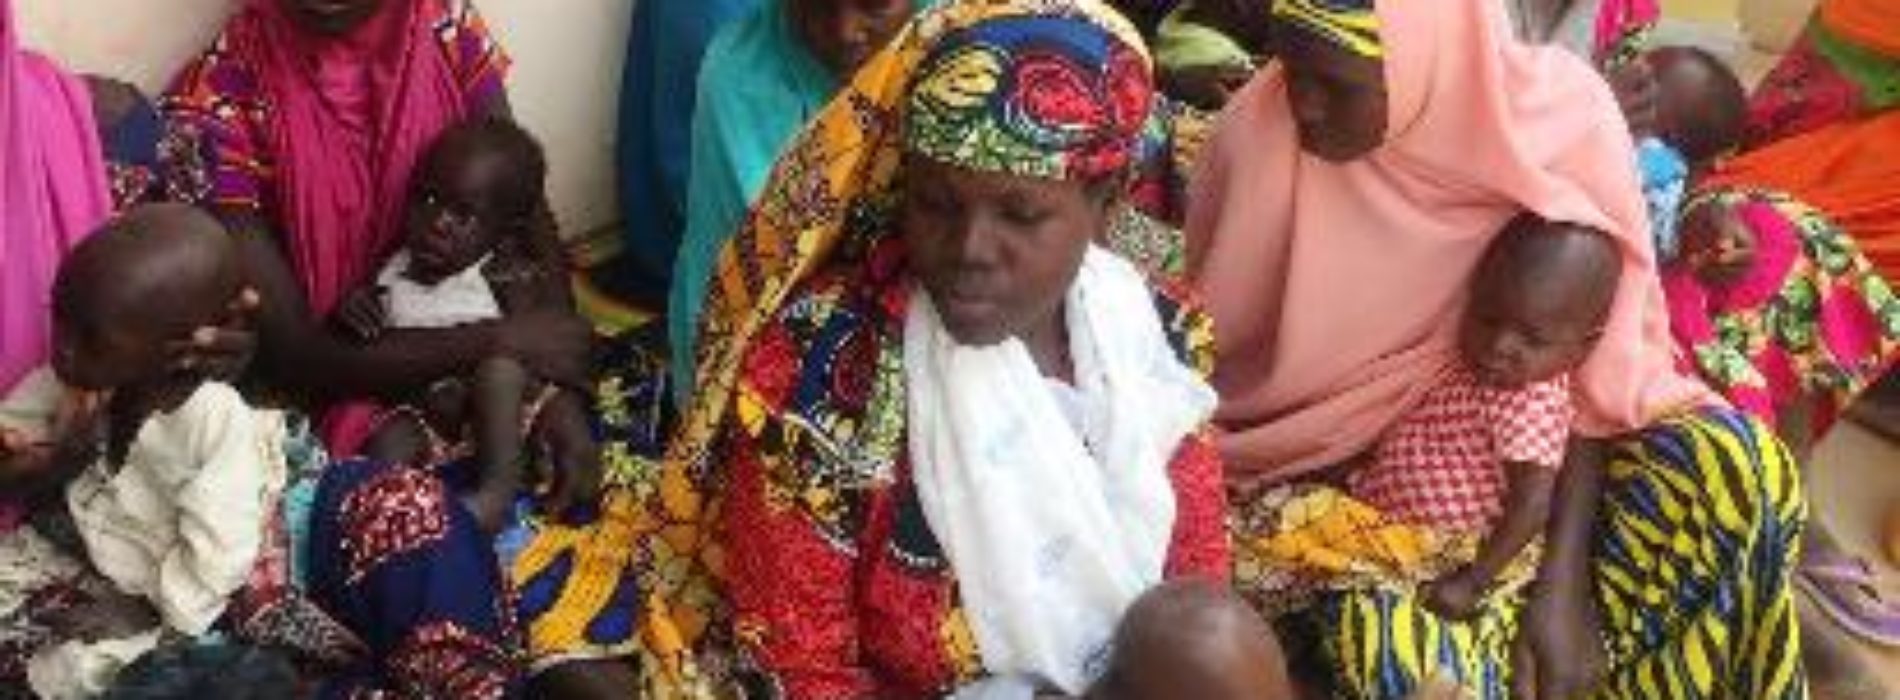 Malnutrition: Worse than COVID-19 in North West